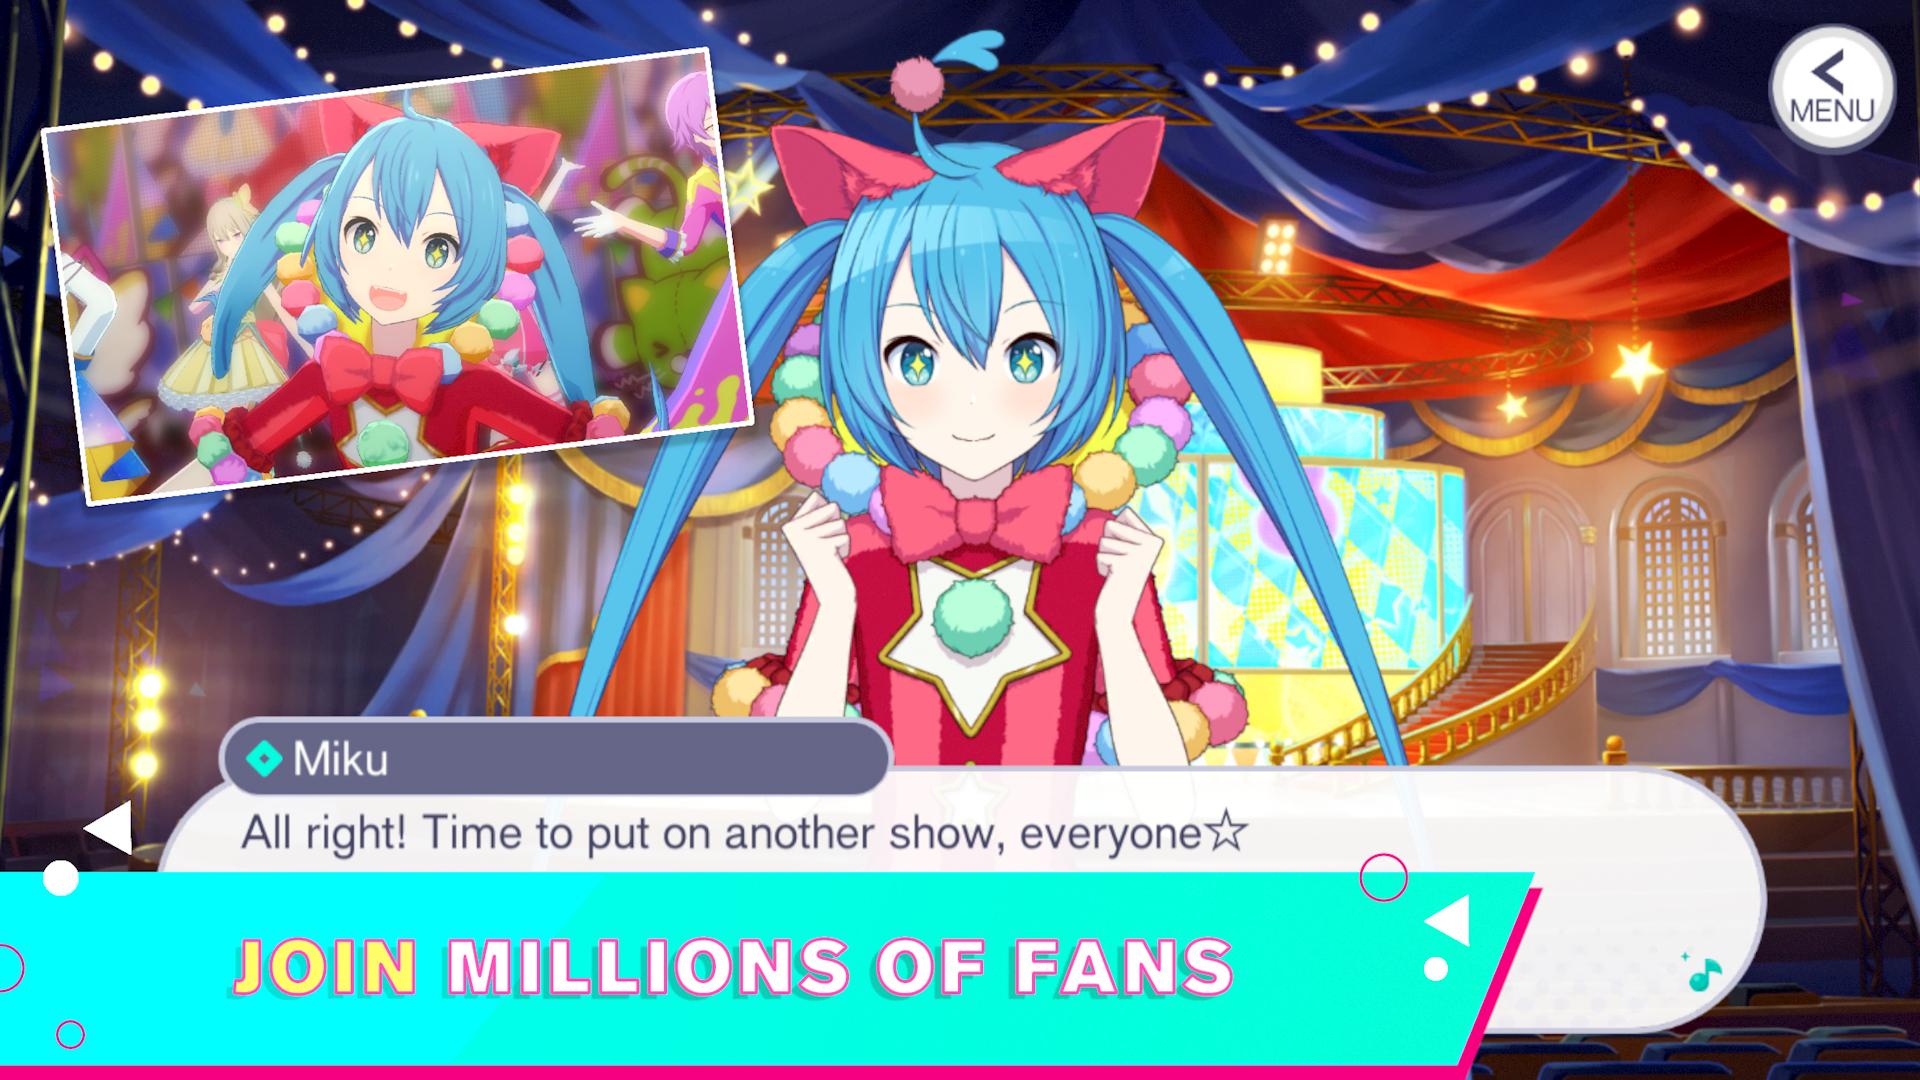 How to Install HATSUNE MIKU: COLORFUL STAGE! with BlueStacks